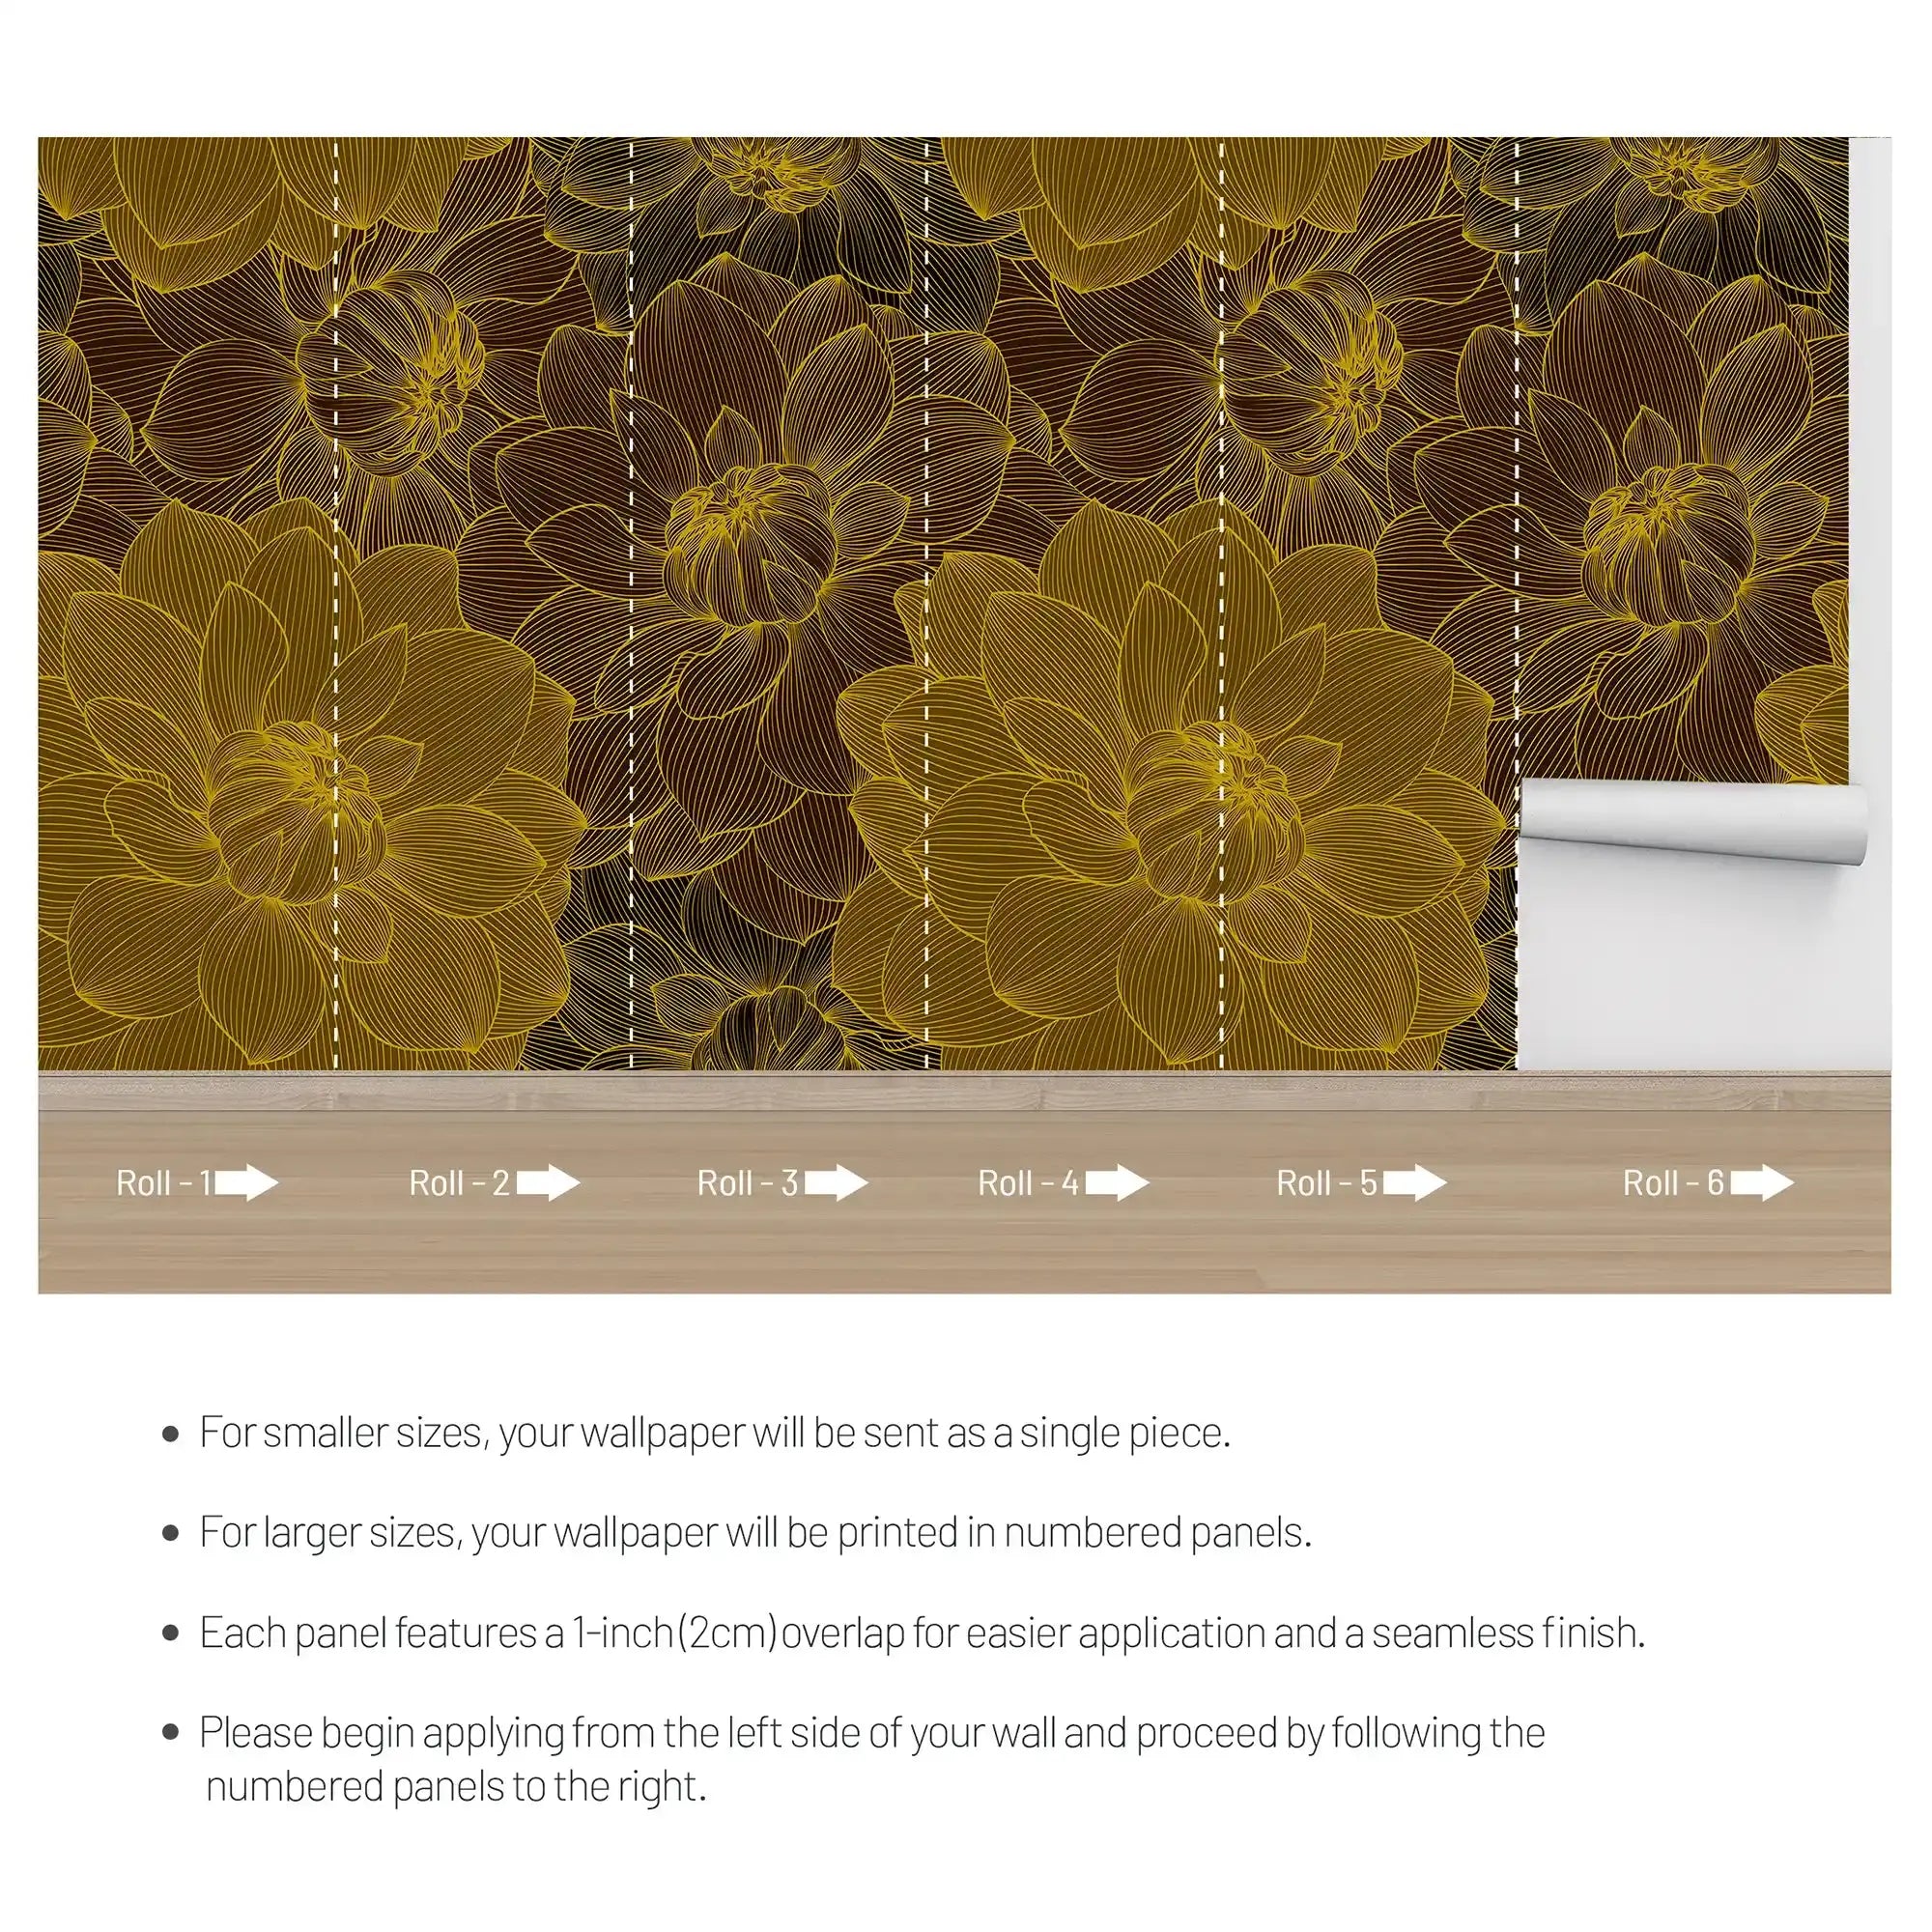 3090-A / Trendy Geometric Floral Self-Adhesive Wallpaper: Transform Your Walls with Easy Install - Artevella